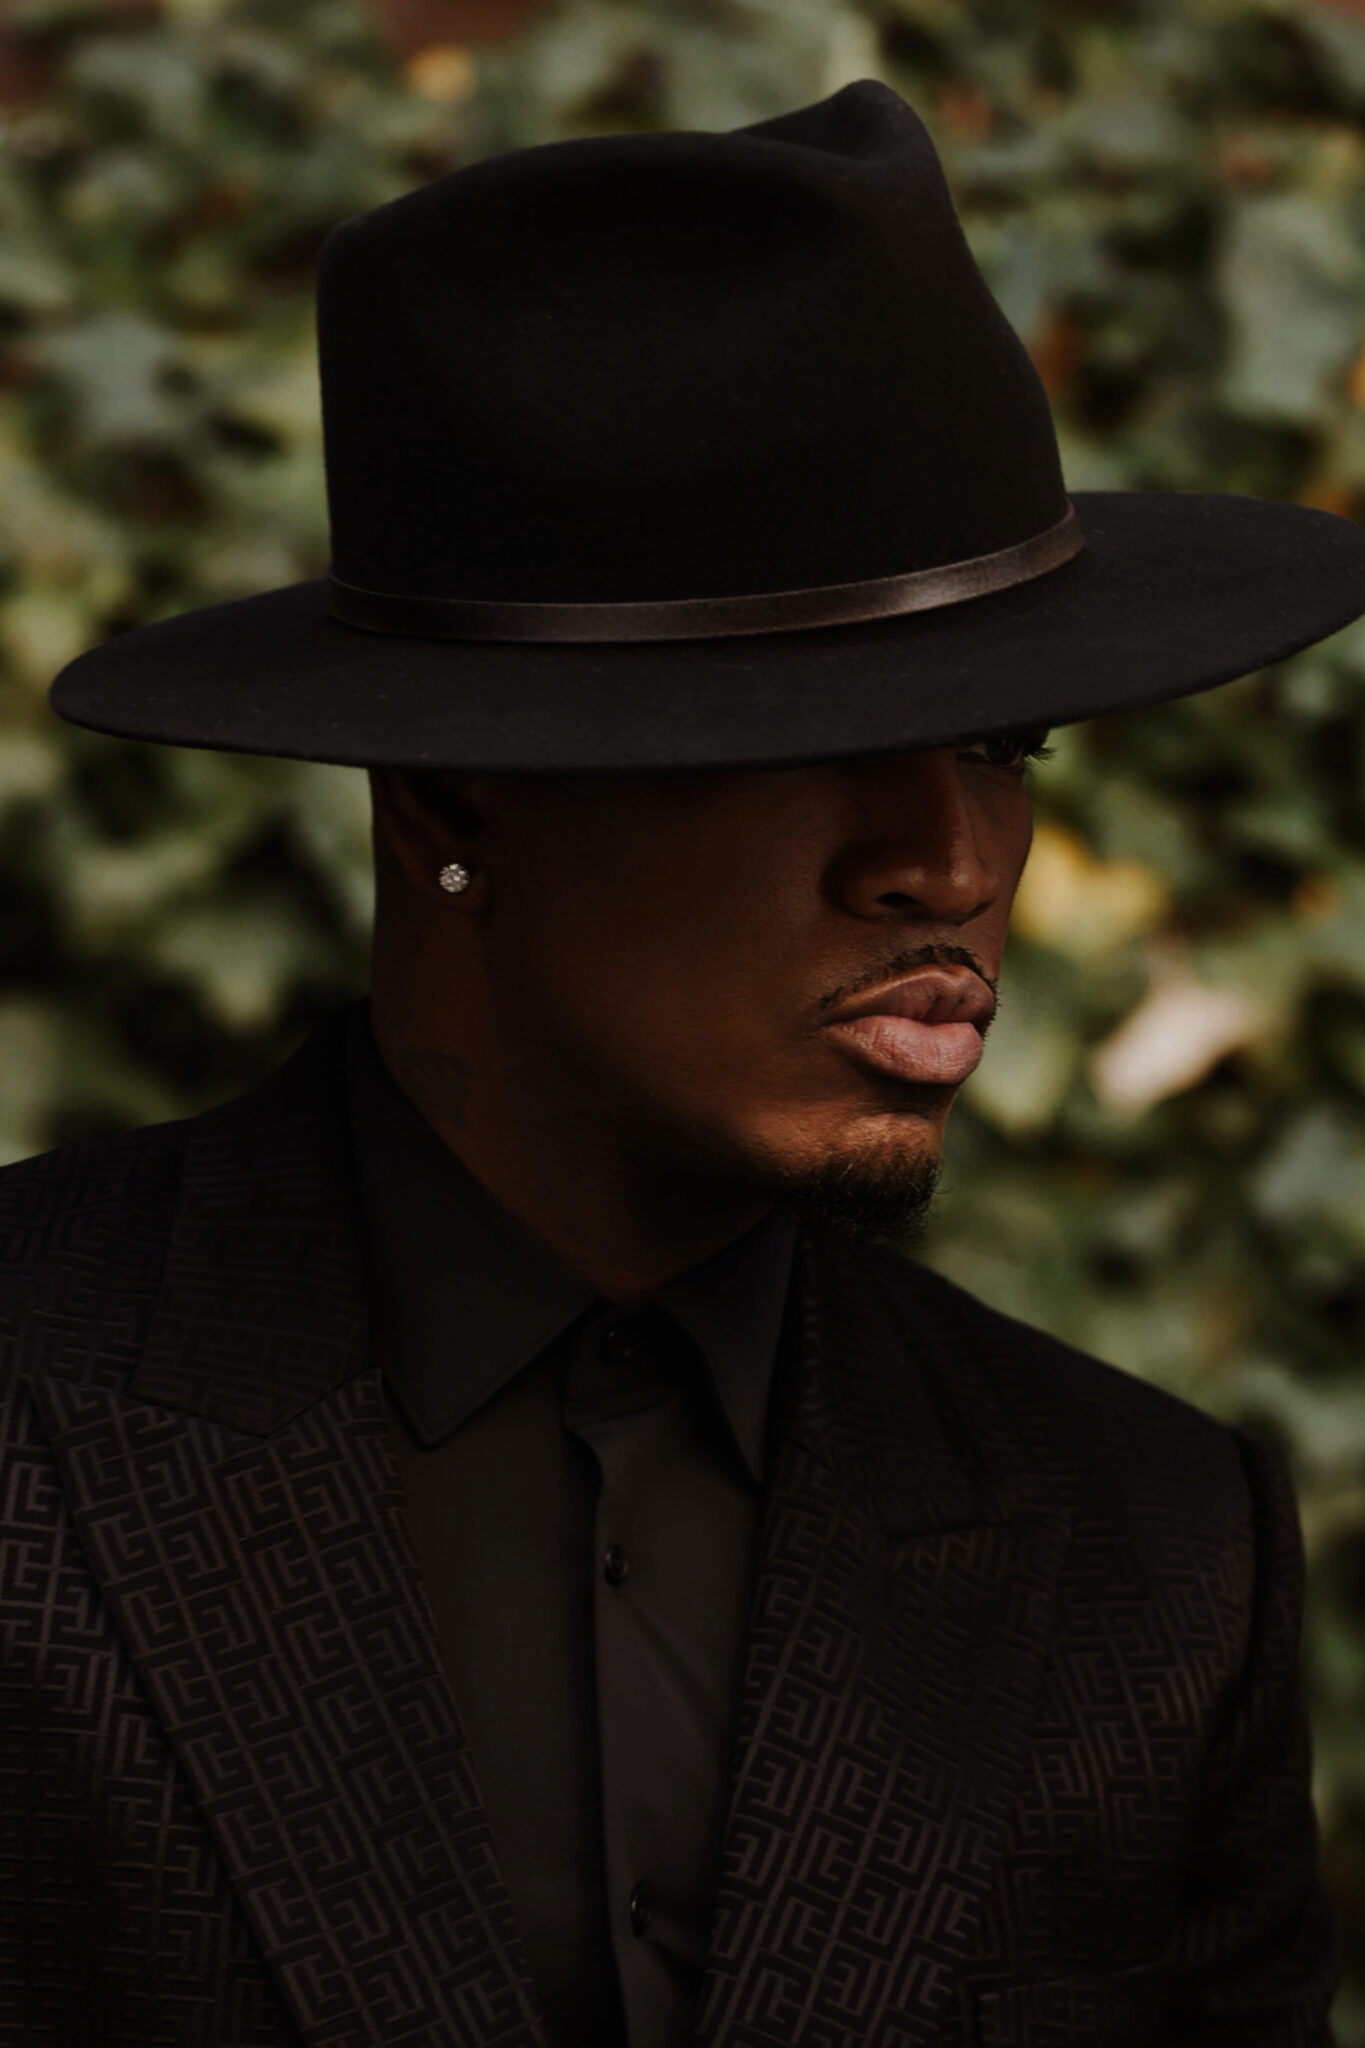 NeYo Shares New Album 'Self Explanatory' Best Investments Now